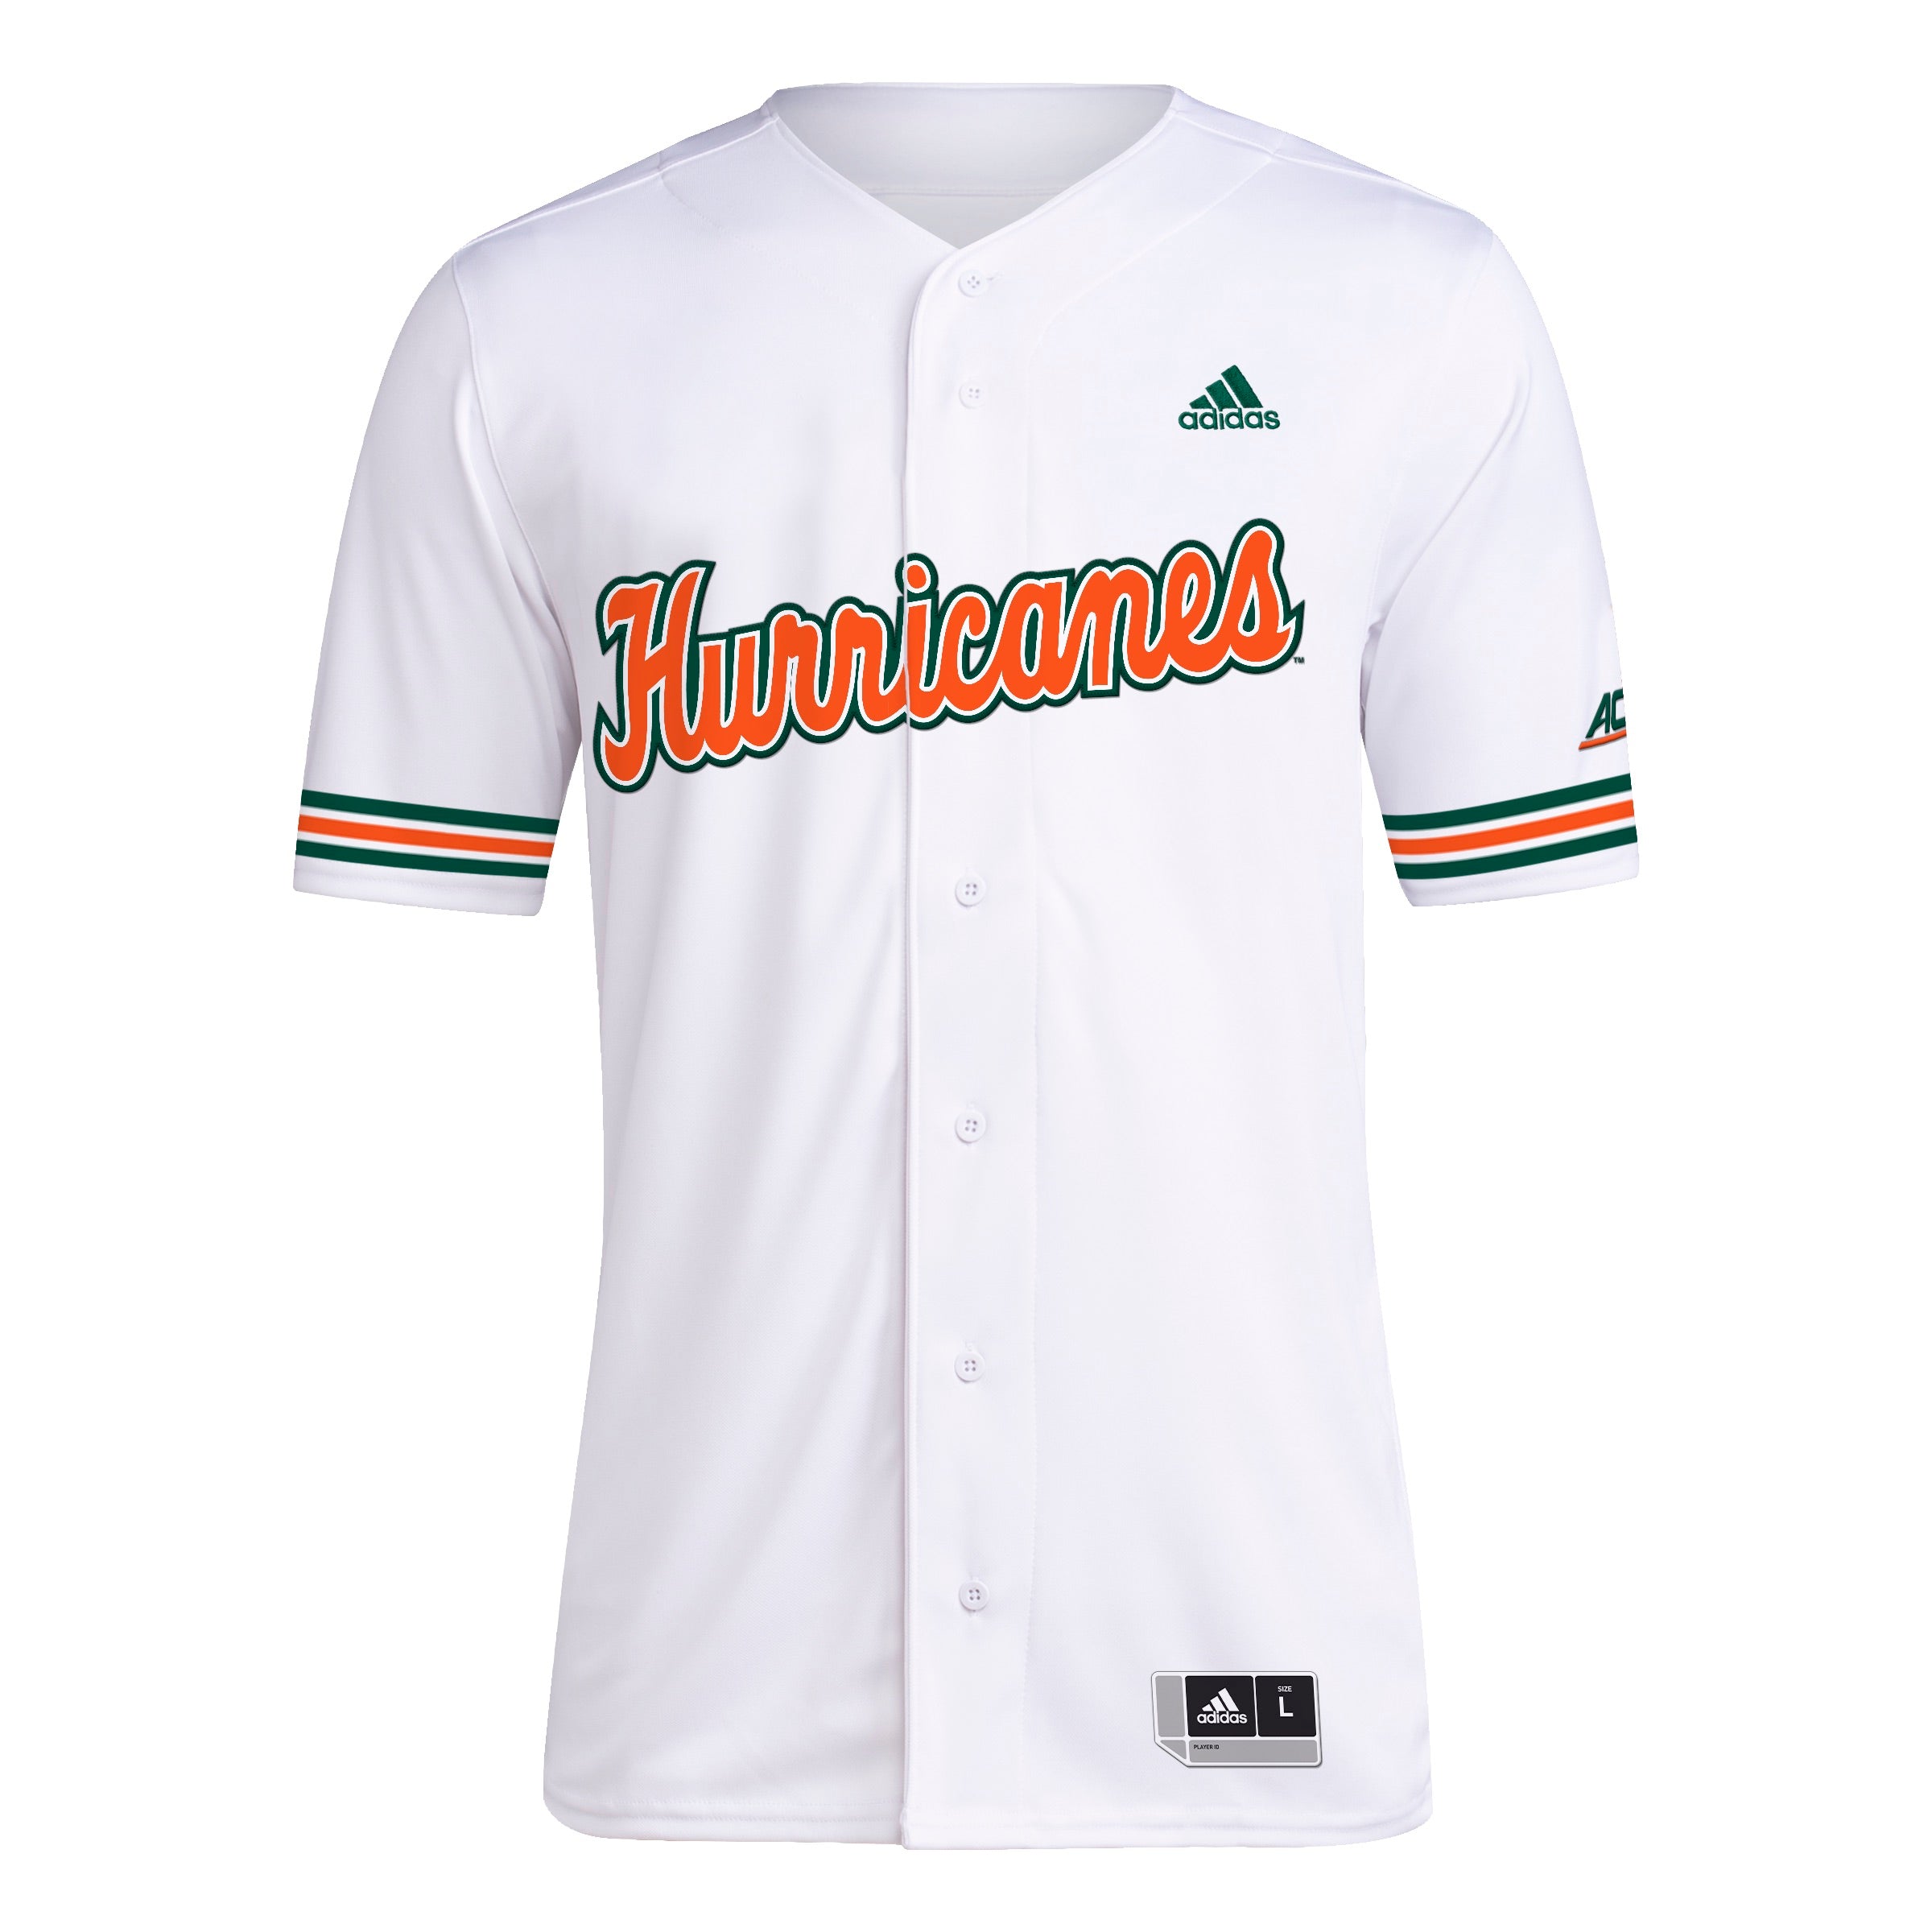 Miami Hurricanes Team-Issued #39 White Jersey from the Baseball